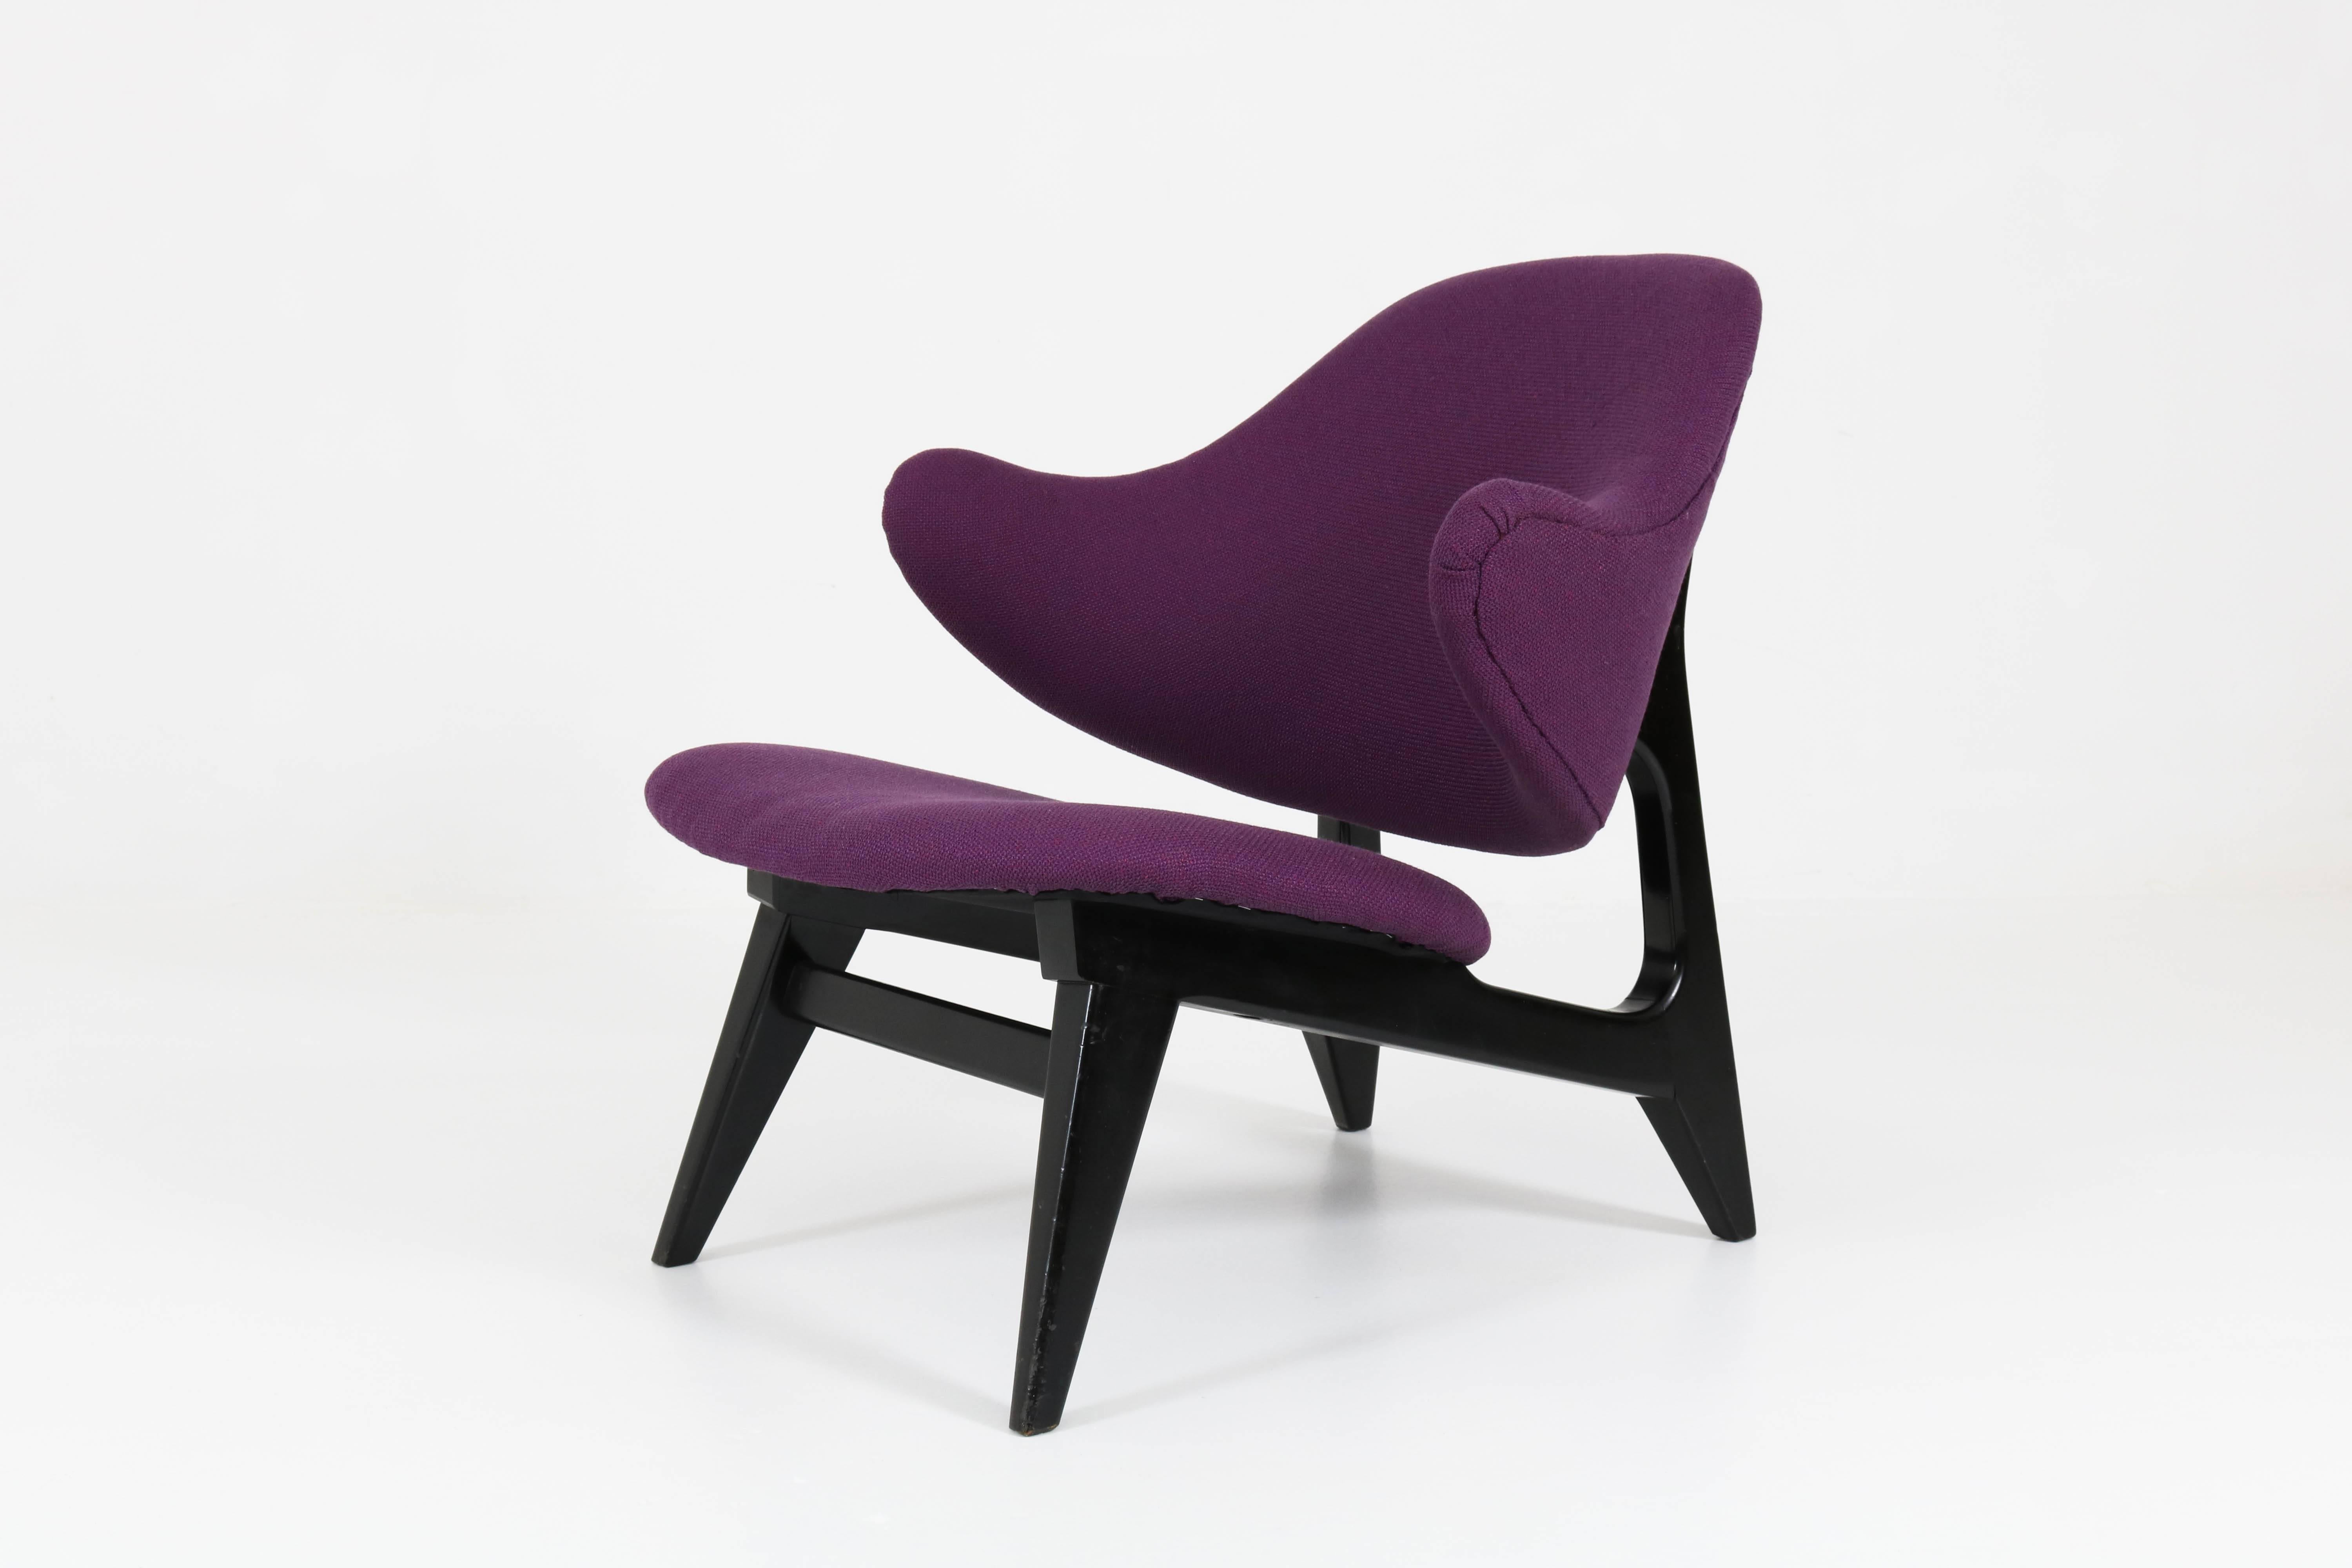 Lacquered Dutch Mid-Century Modern Lounge Chair by Louis Van Teeffelen for WeBe, 1960s